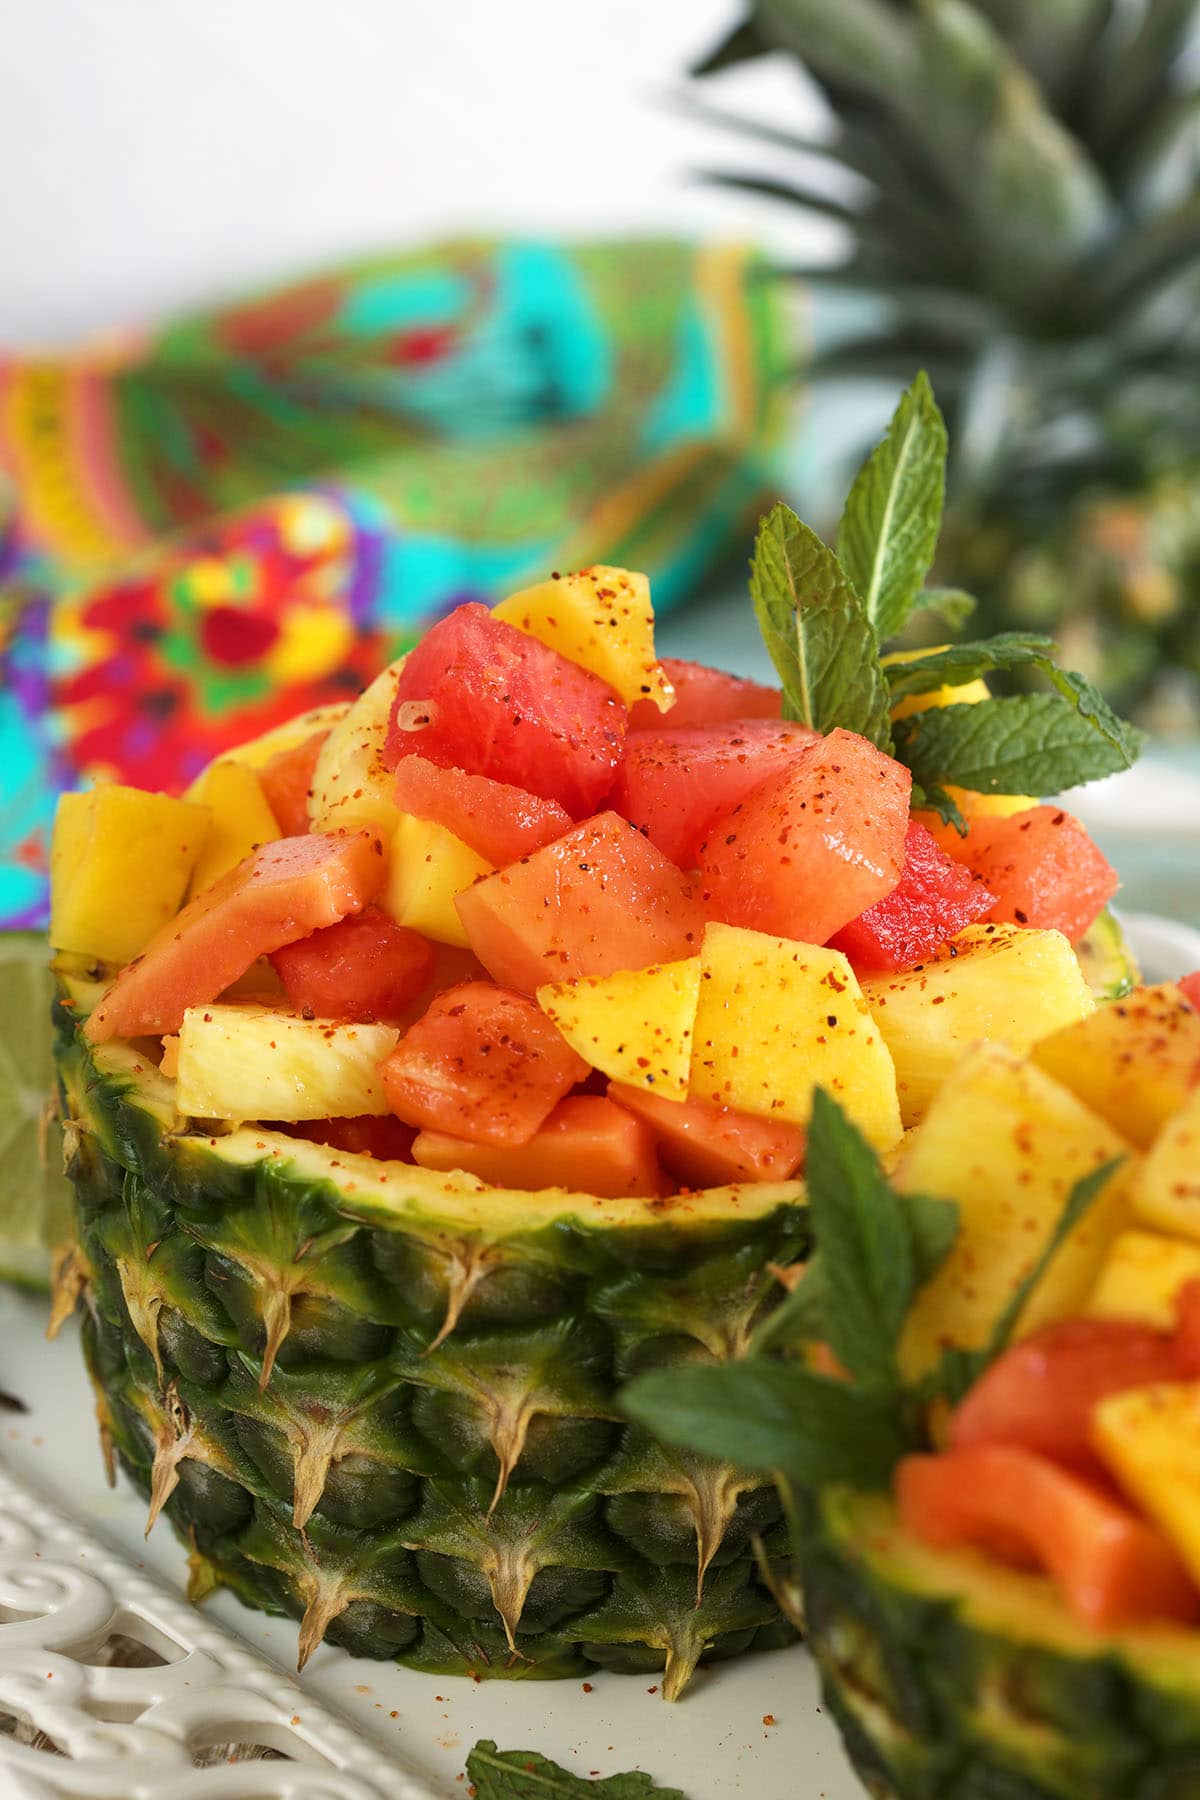 A fruit salad is placed in half of a pineapple.